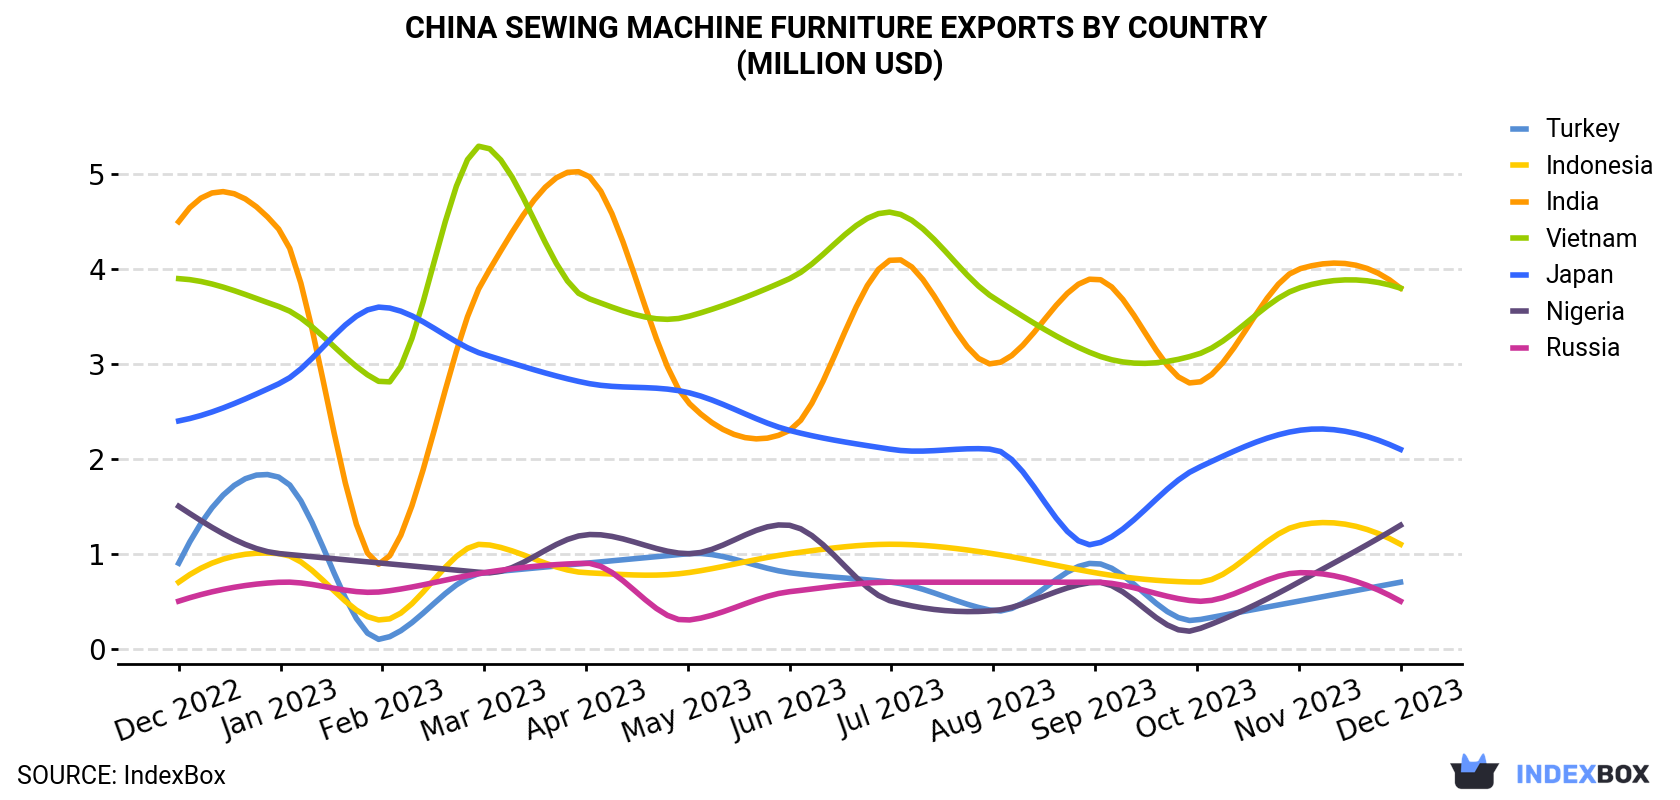 China Sewing Machine Furniture Exports By Country (Million USD)